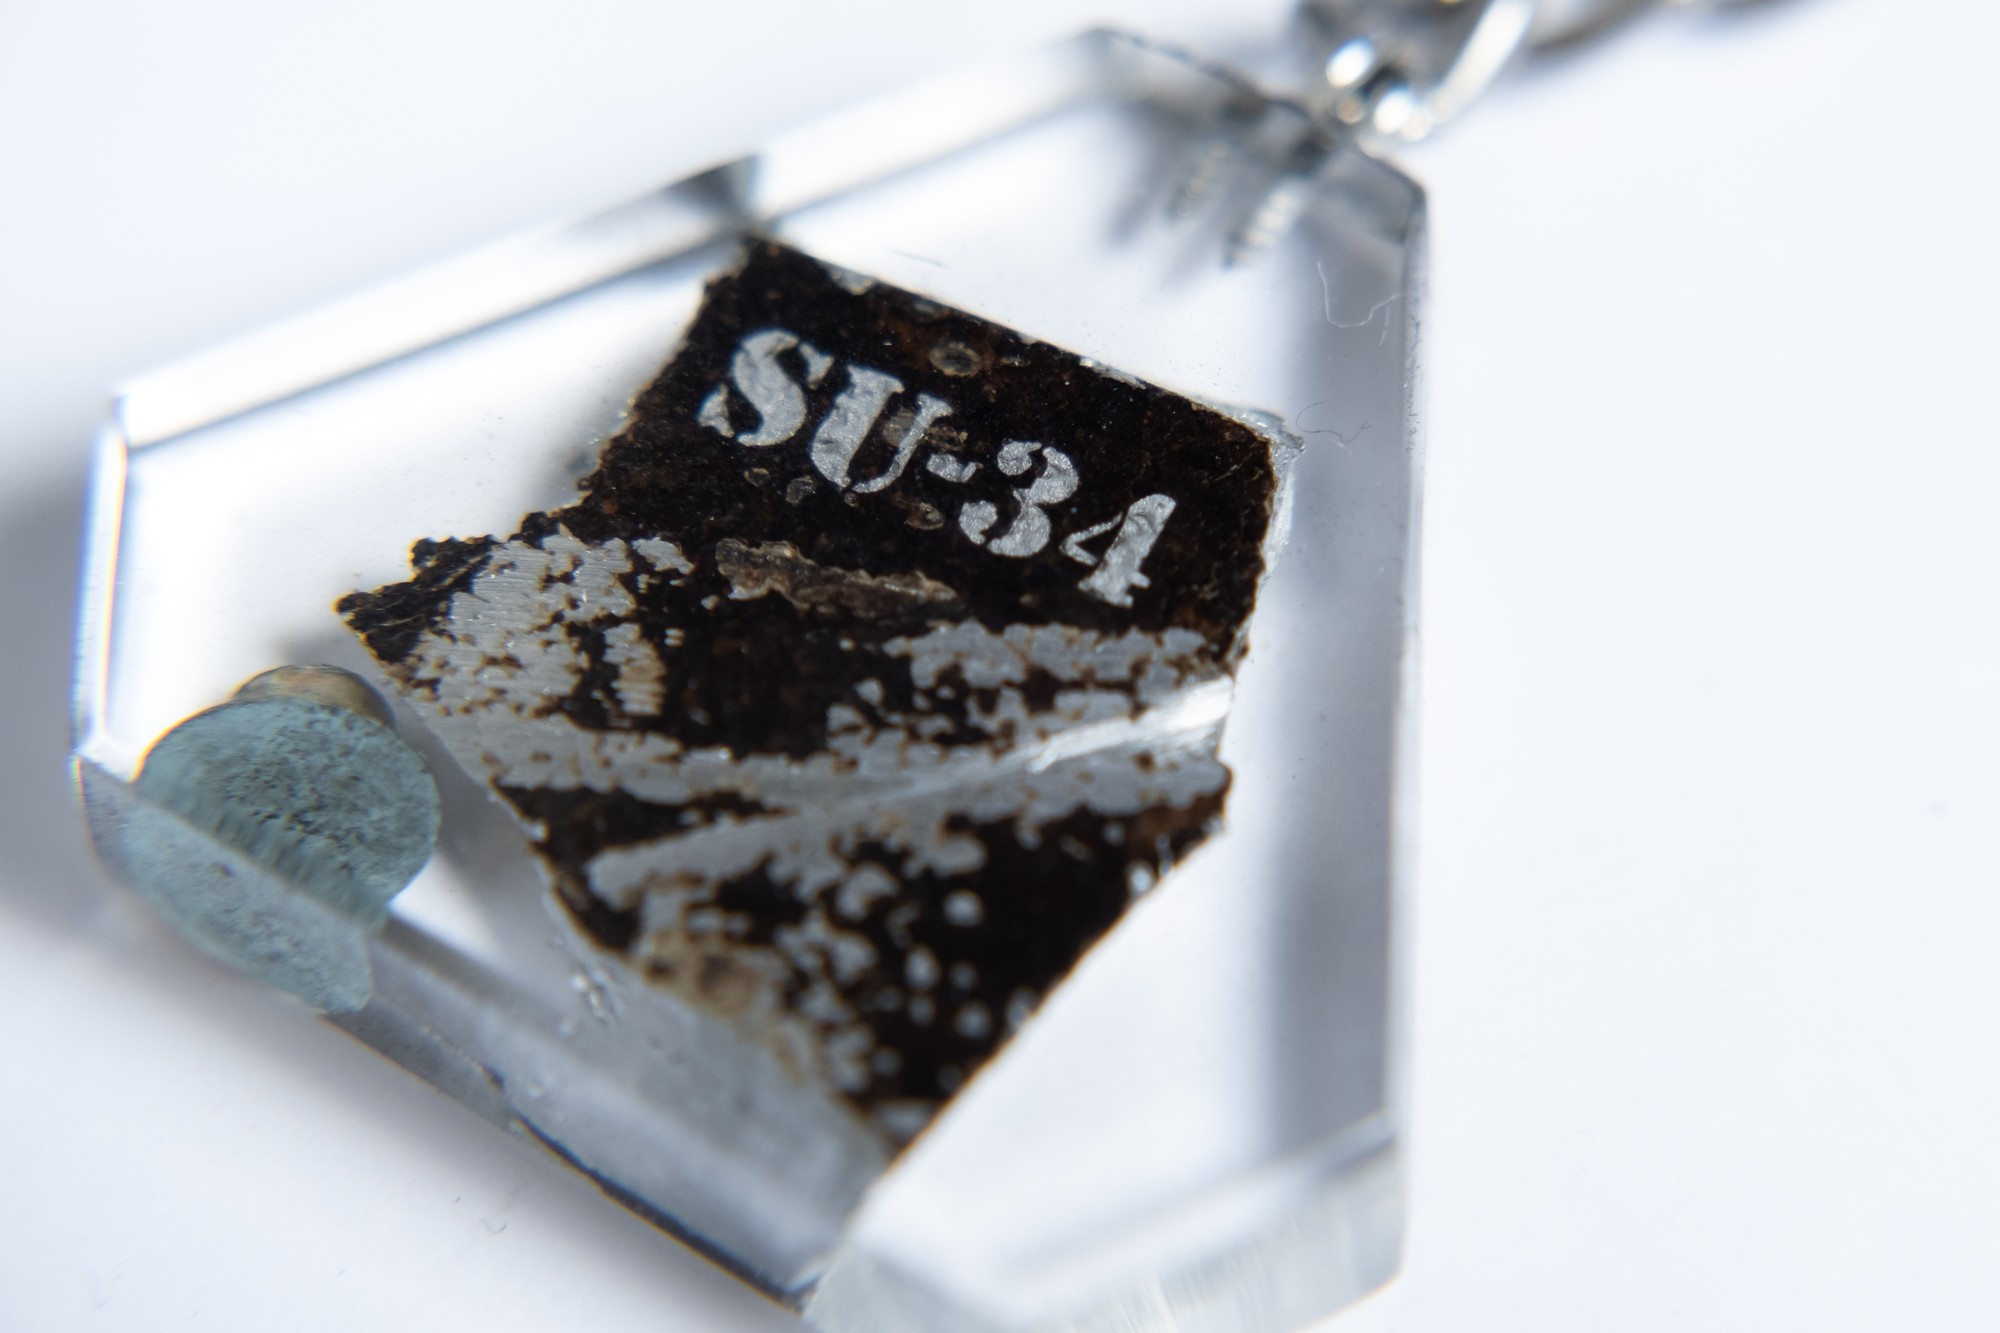 Keyring with a piece of taken down russian su-34 aircraft